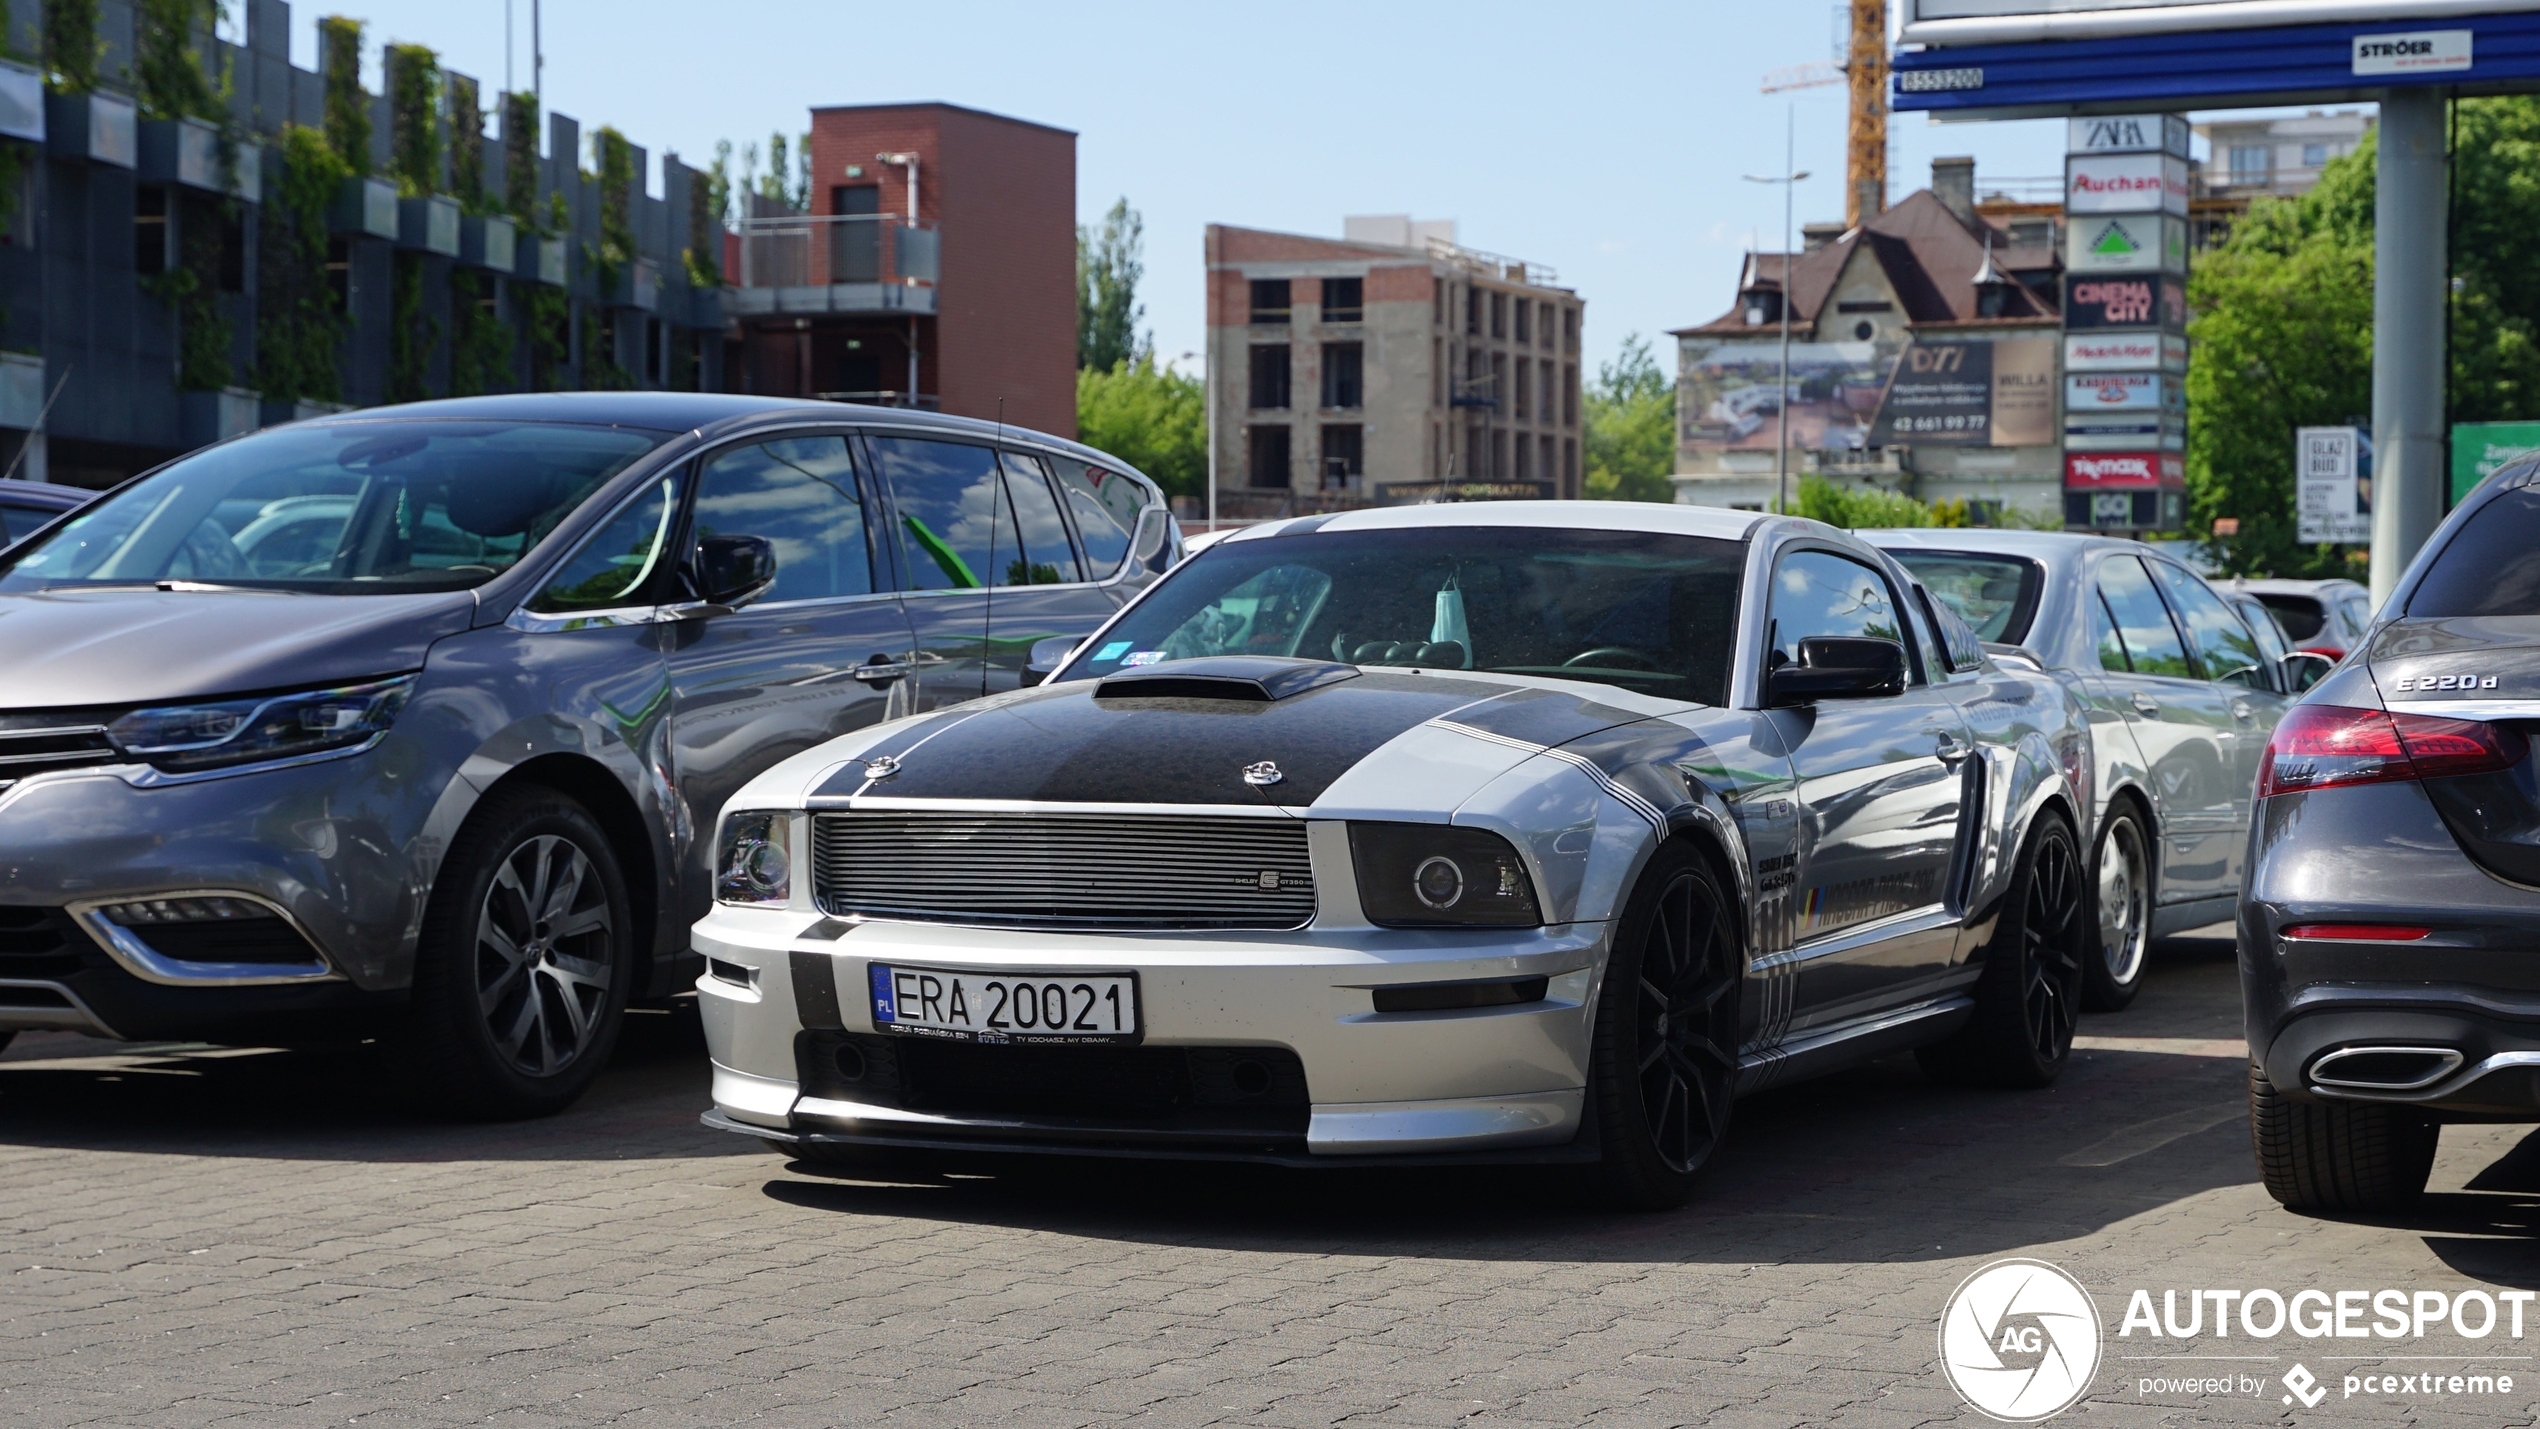 Ford Mustang Shelby GT 2009 Limited Edition 1of9